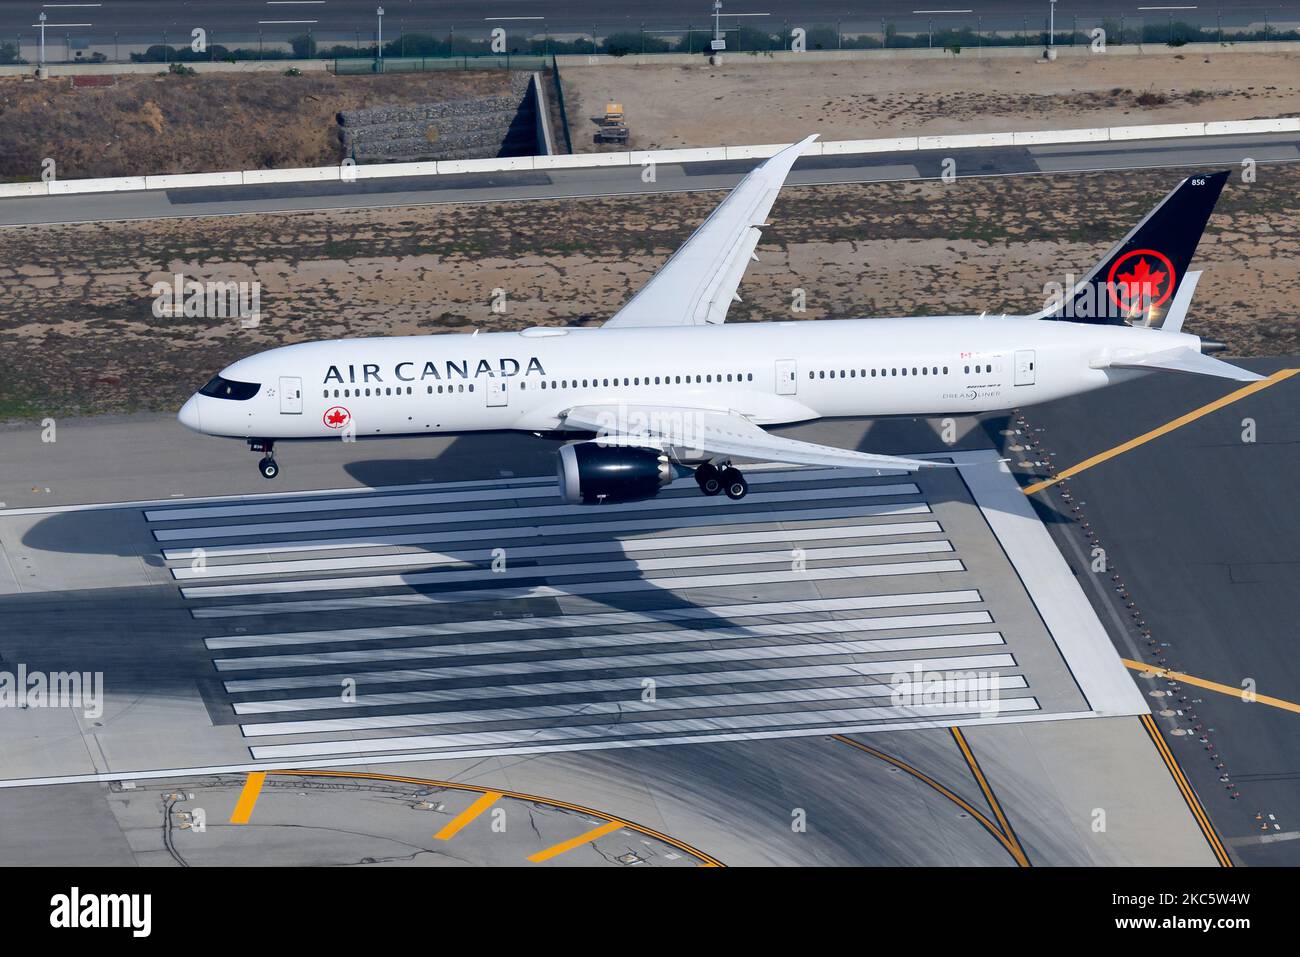 Air Canada Boeing 787 Dreamliner aircraft landing. Airplane 787-9 of Air Canada flying. Plane registered as C-FVLZ on final approach over the runway. Stock Photo